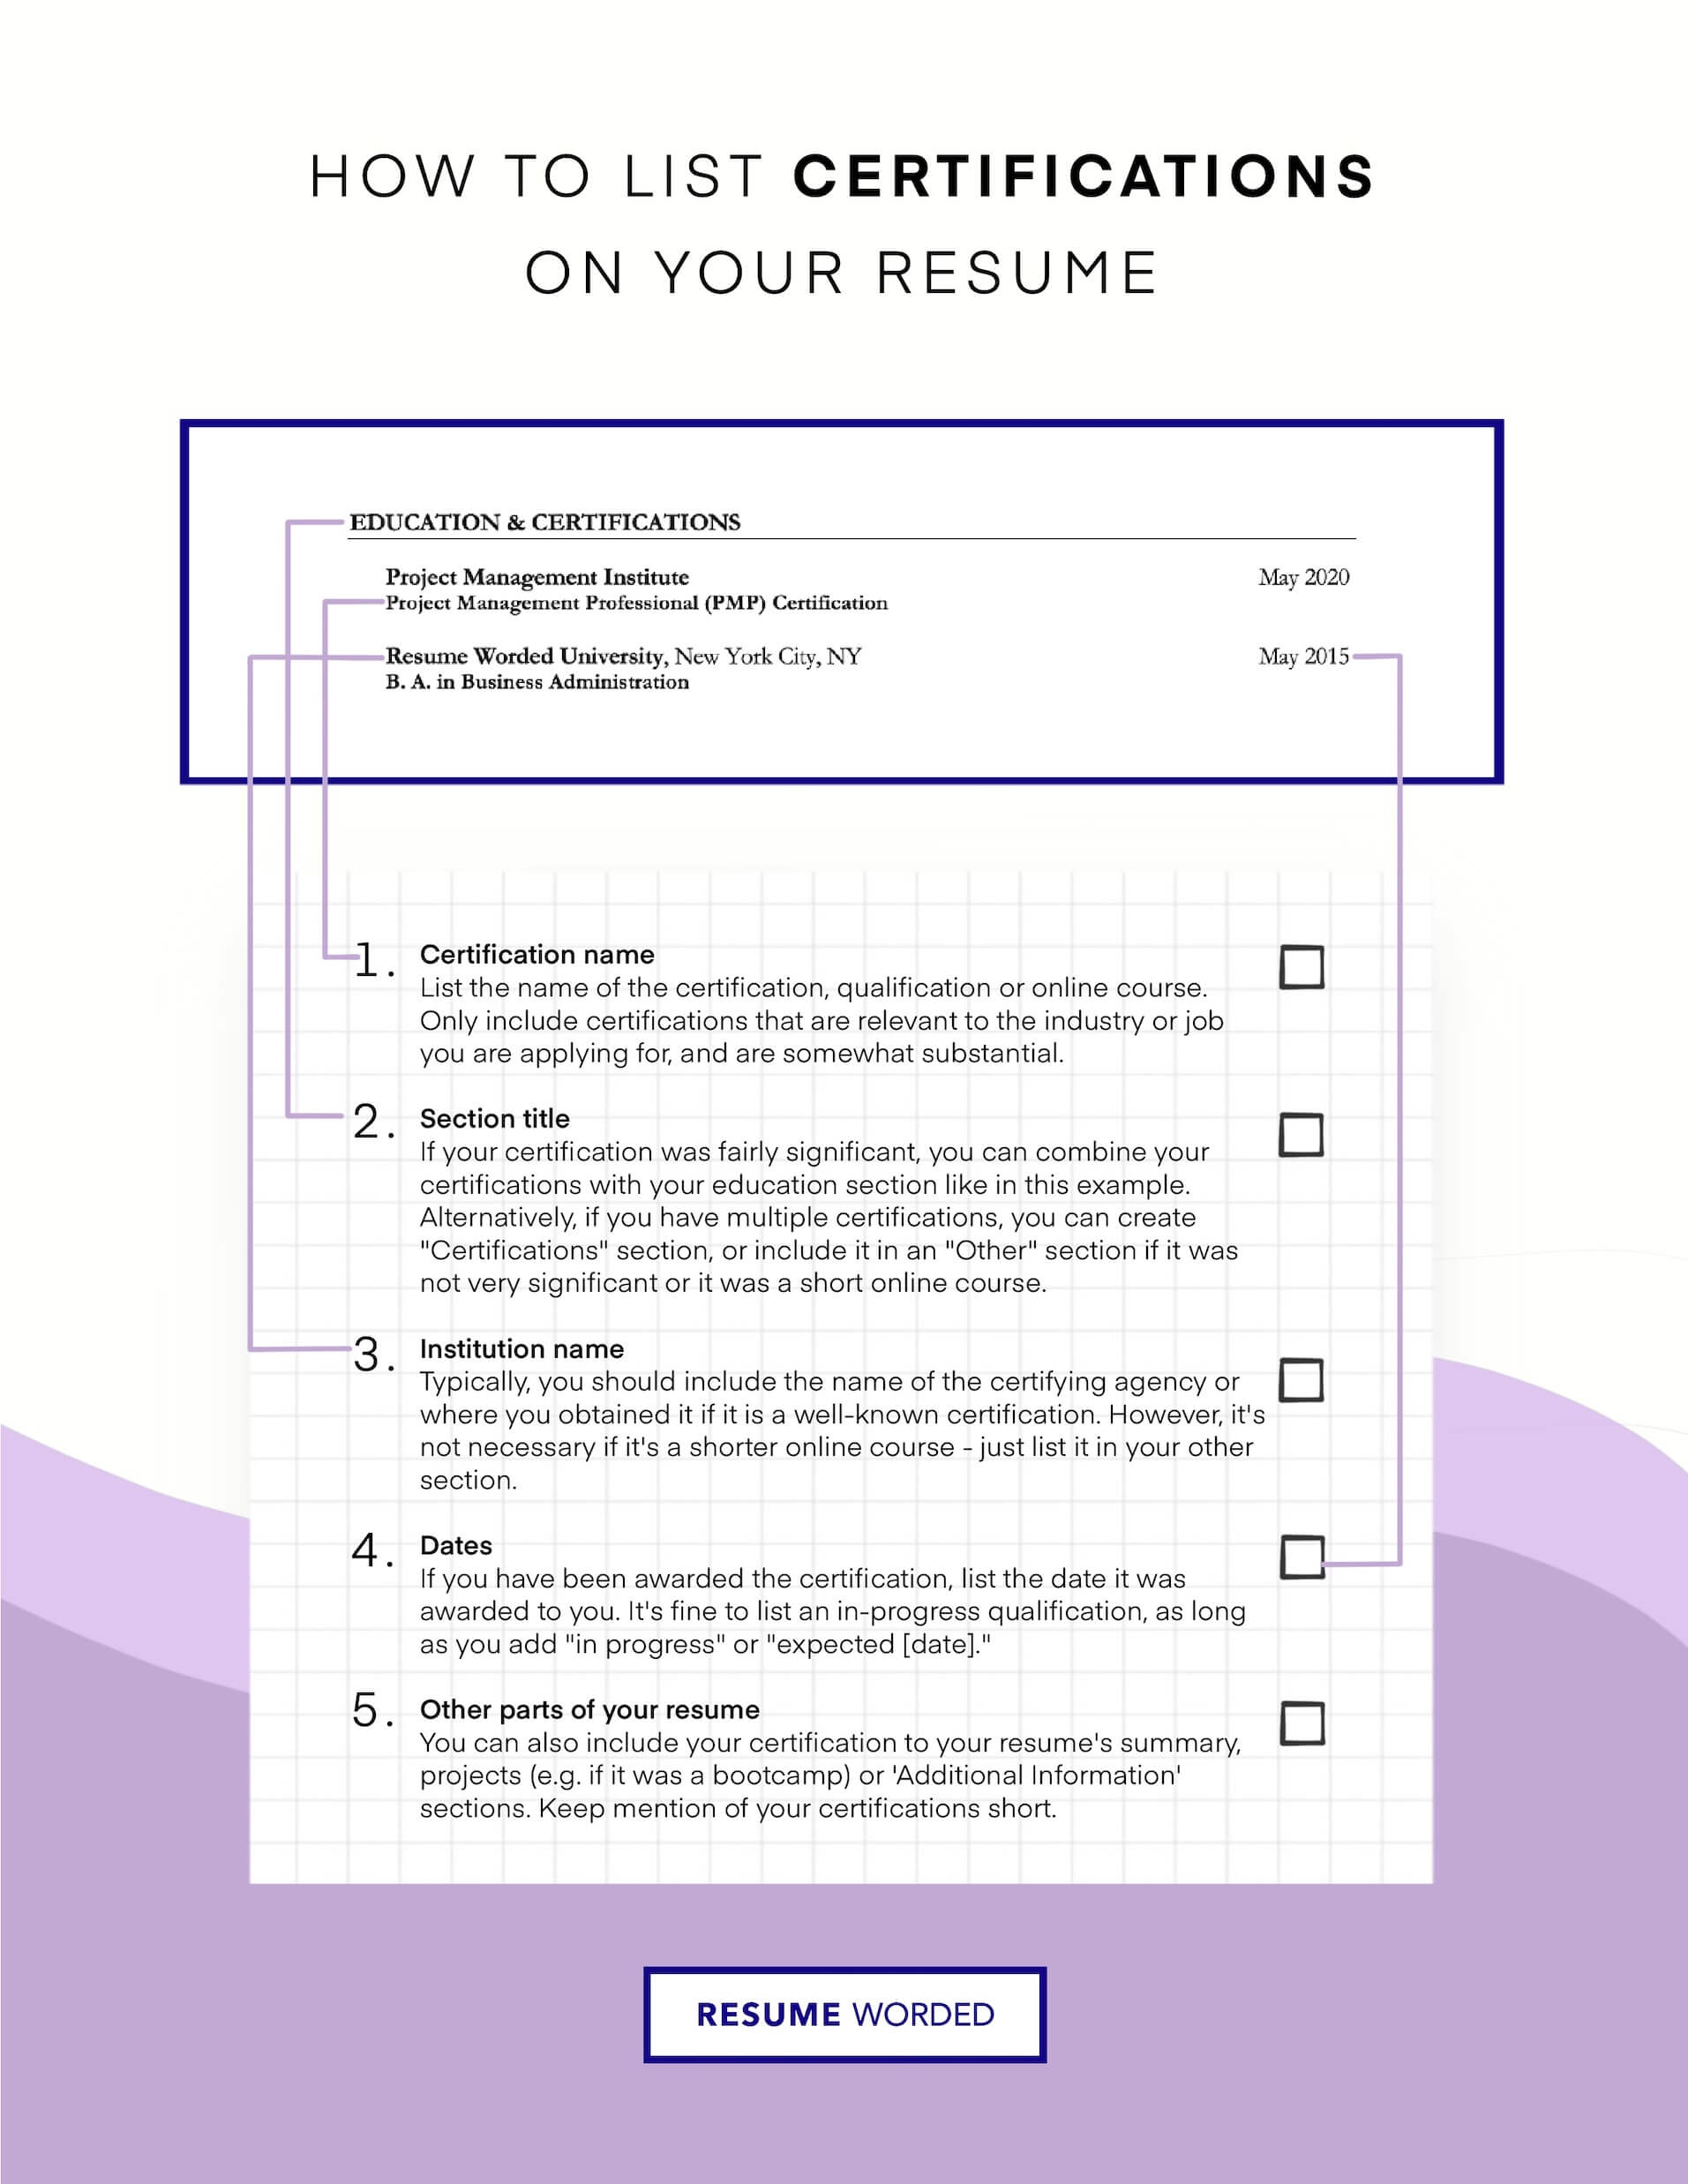 Highlight certification in diversity. - Diversity and Inclusion Specialist Resume